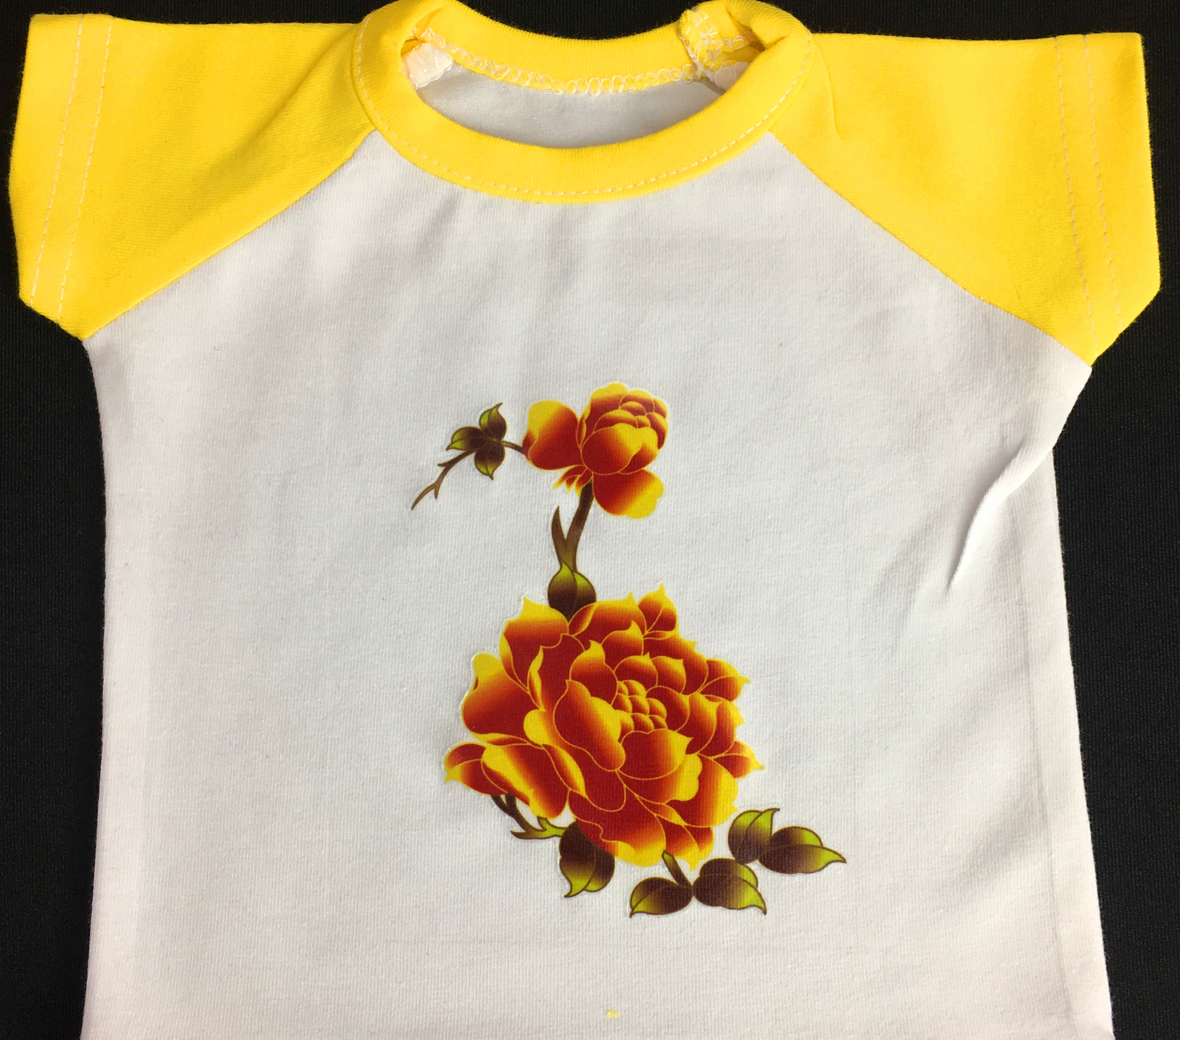 Light Inkjet Transfer Paper（HT-150) for printing and cutting to make a imitation embroidery design